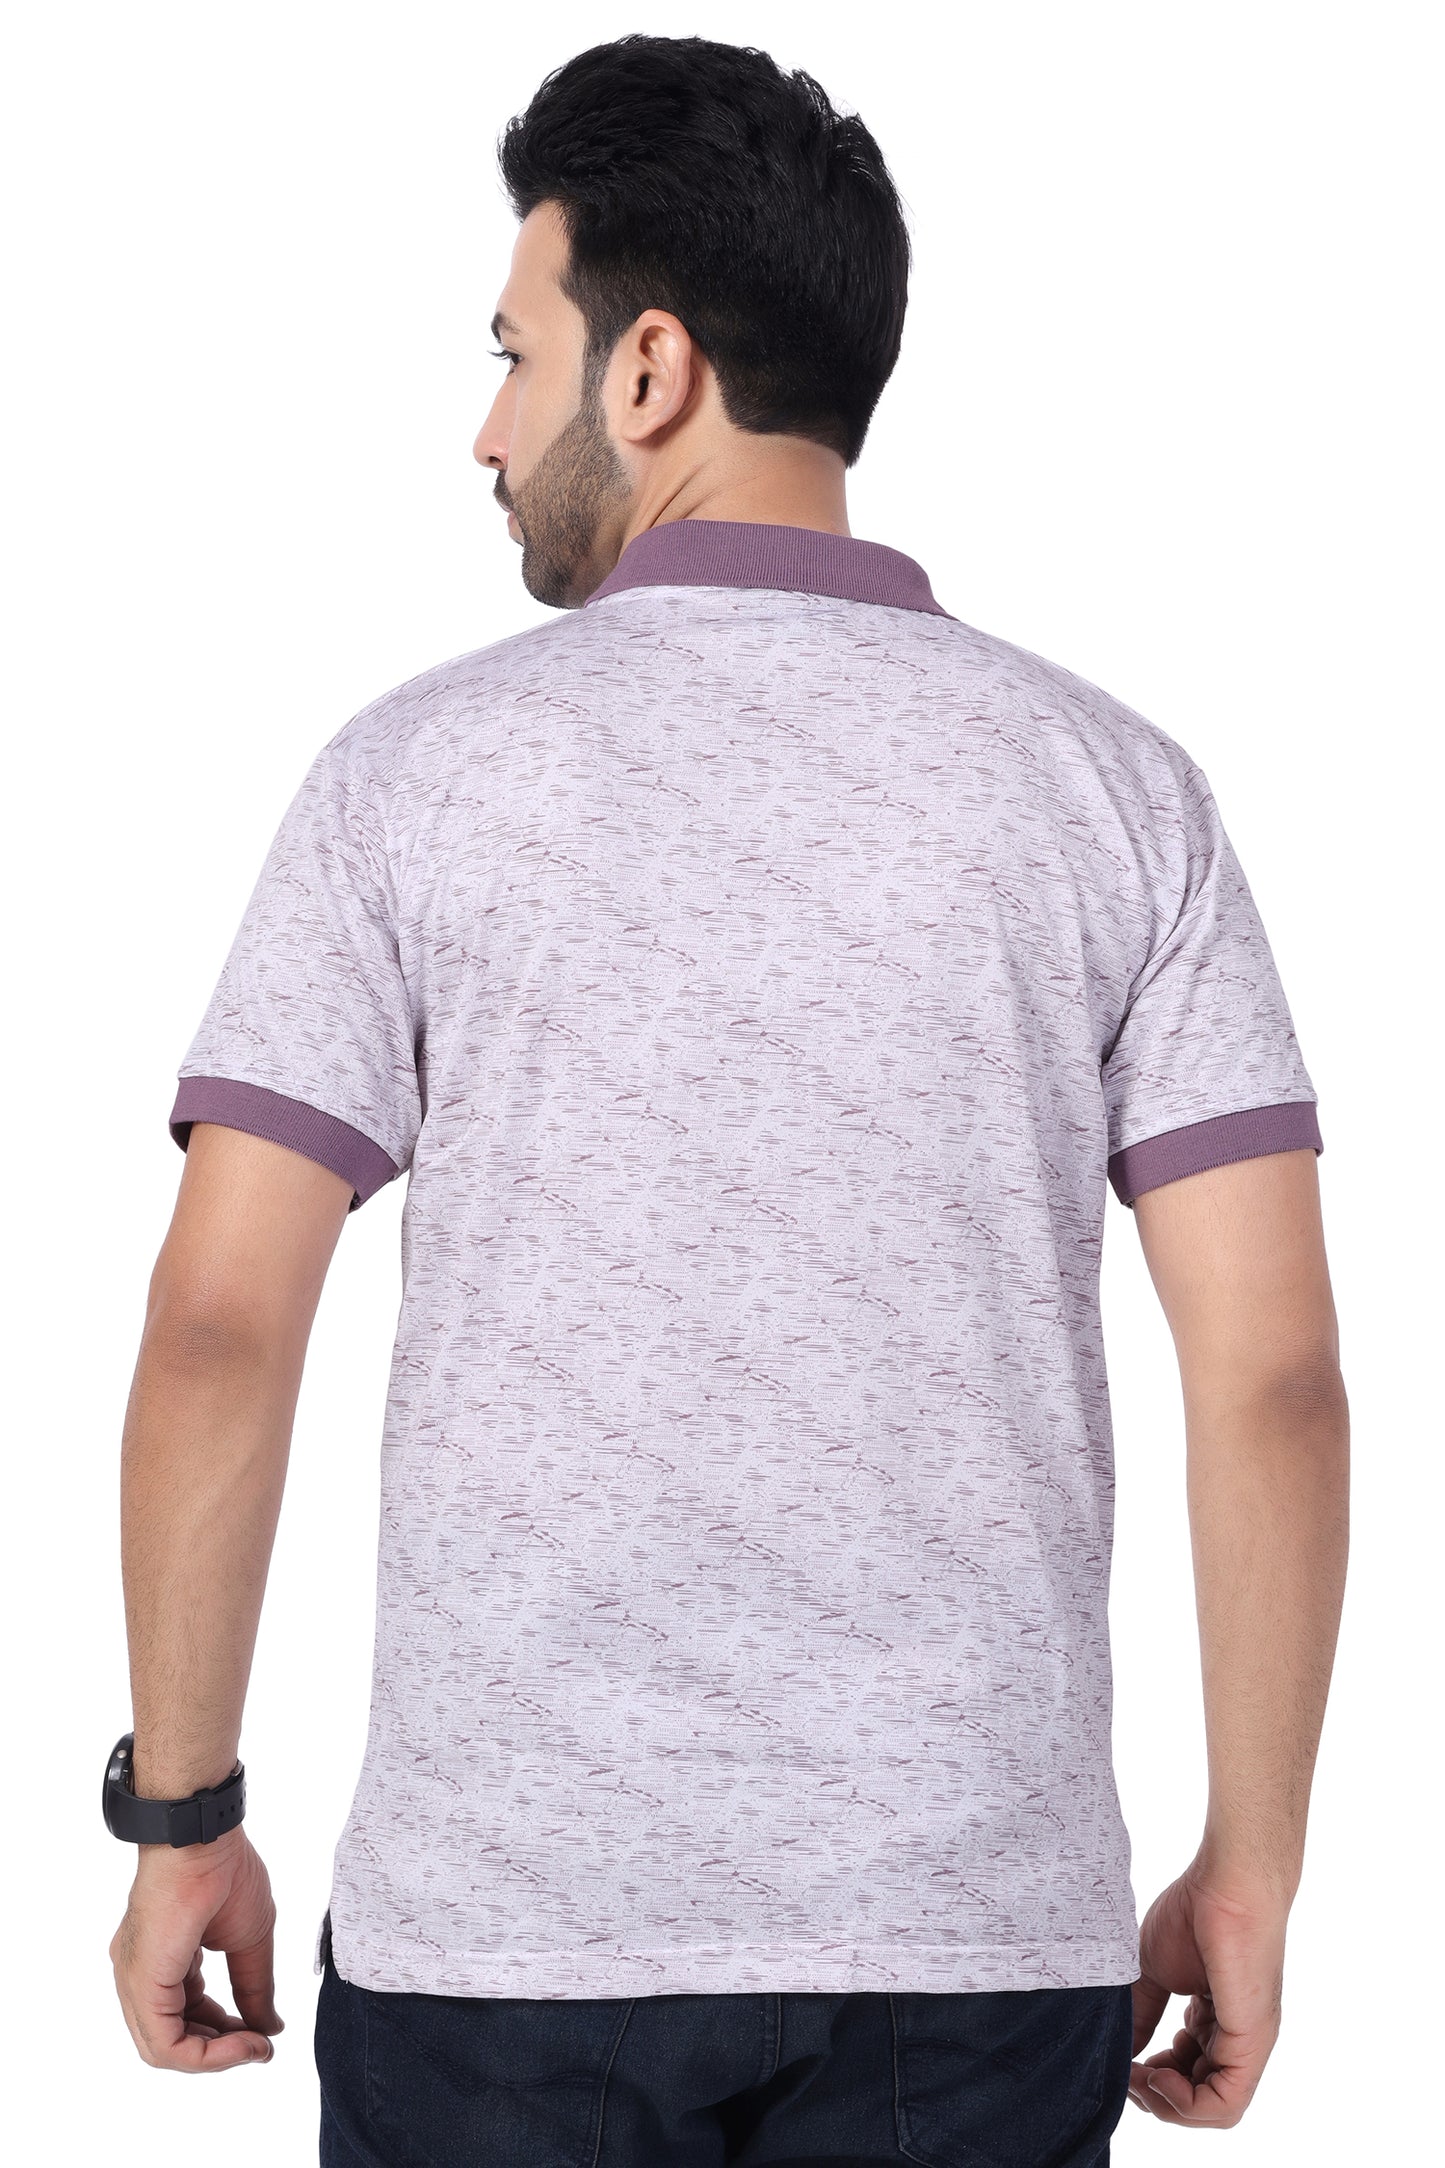 Men's Cotton Polo Neck Half Sleeve All Overl Print T-Shirt with Pocket | SIZES FROM XS TO 2XL